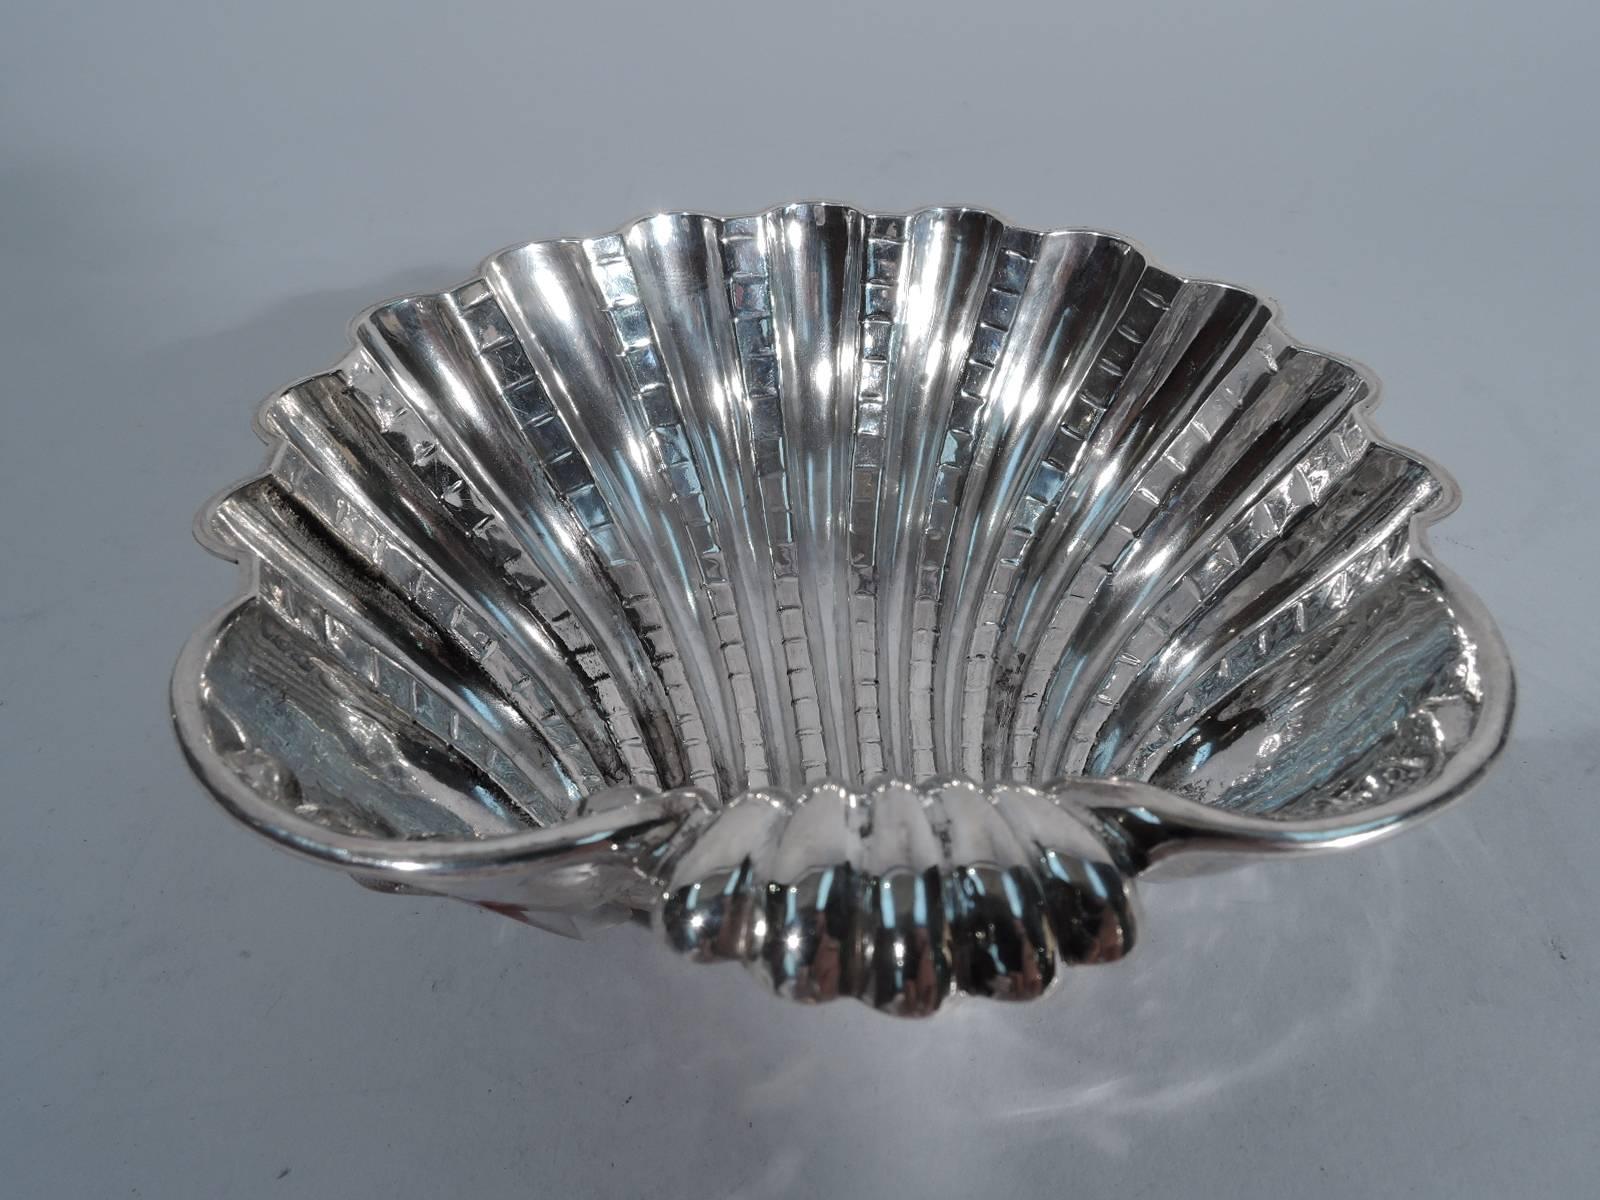 Hand-hammered sterling silver scallop shell. Made by Carla De Boni in Padua for Missiaglia in Venice. Deep bowl and swooshing flutes with incised hatching. Rests on three seashell supports. Tactile and dynamic interpretation of traditional